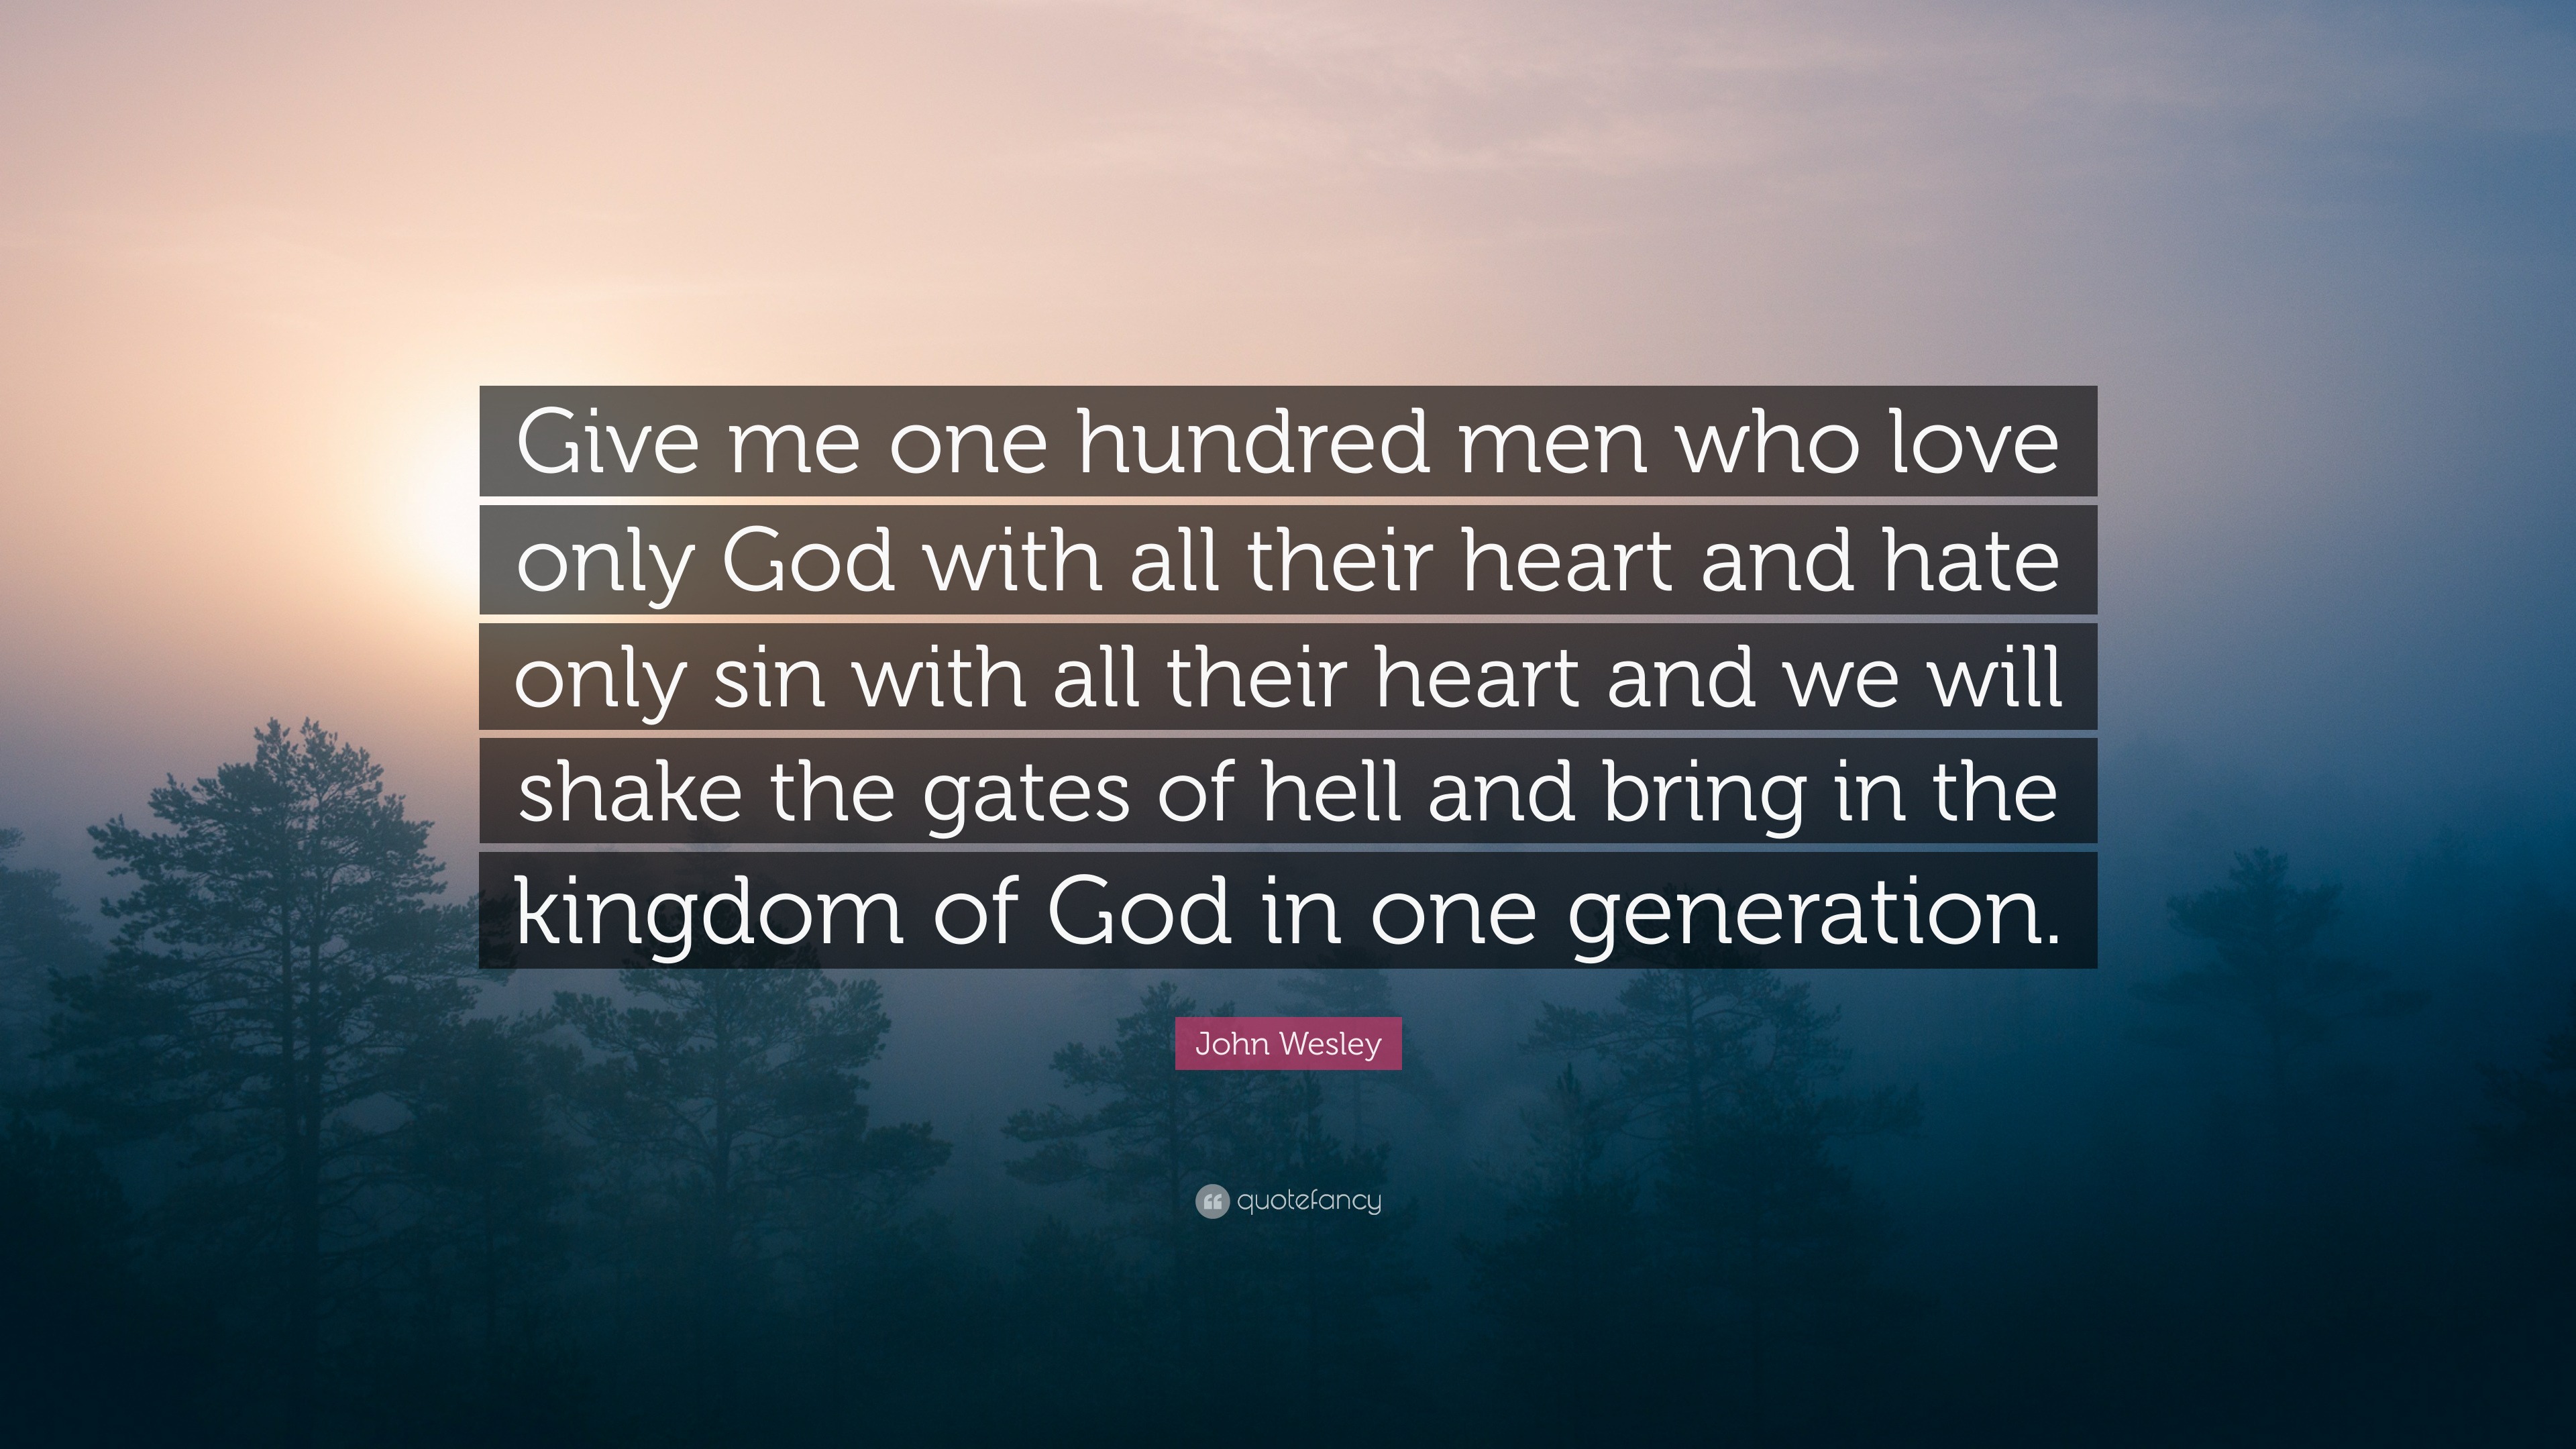 John Wesley Quote “Give me one hundred men who love only God with all